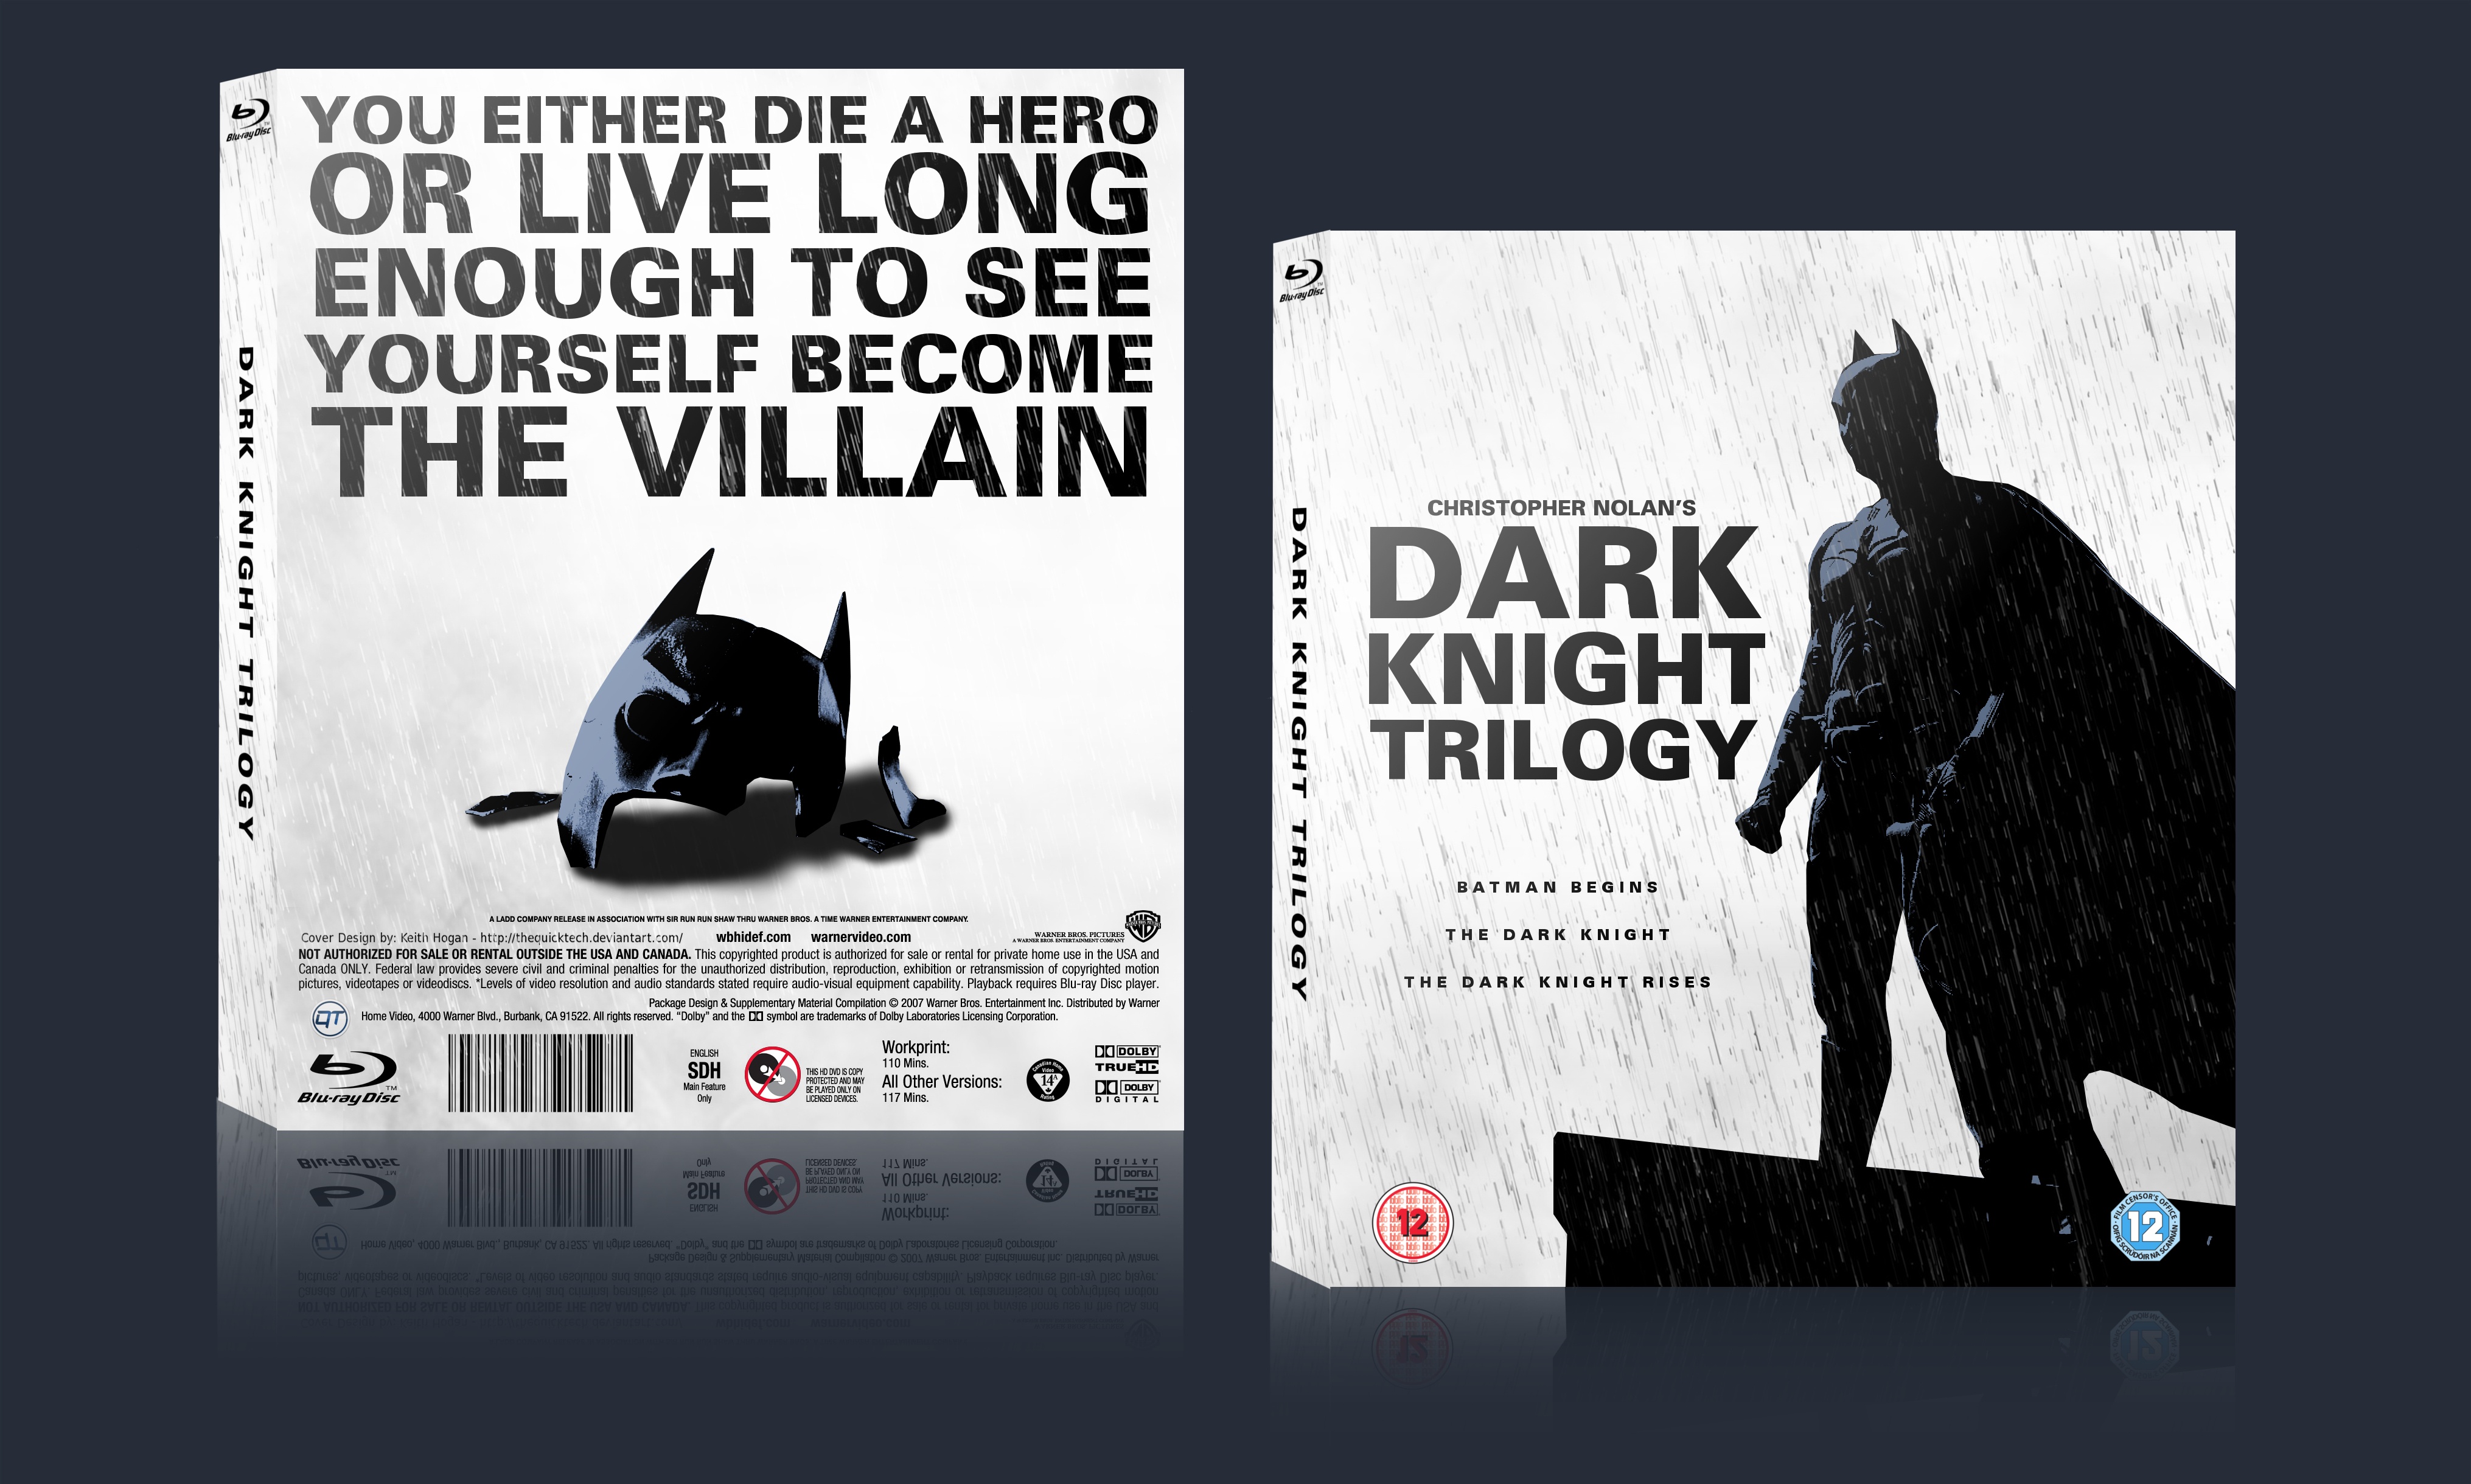 The Dark Knight Trilogy box cover